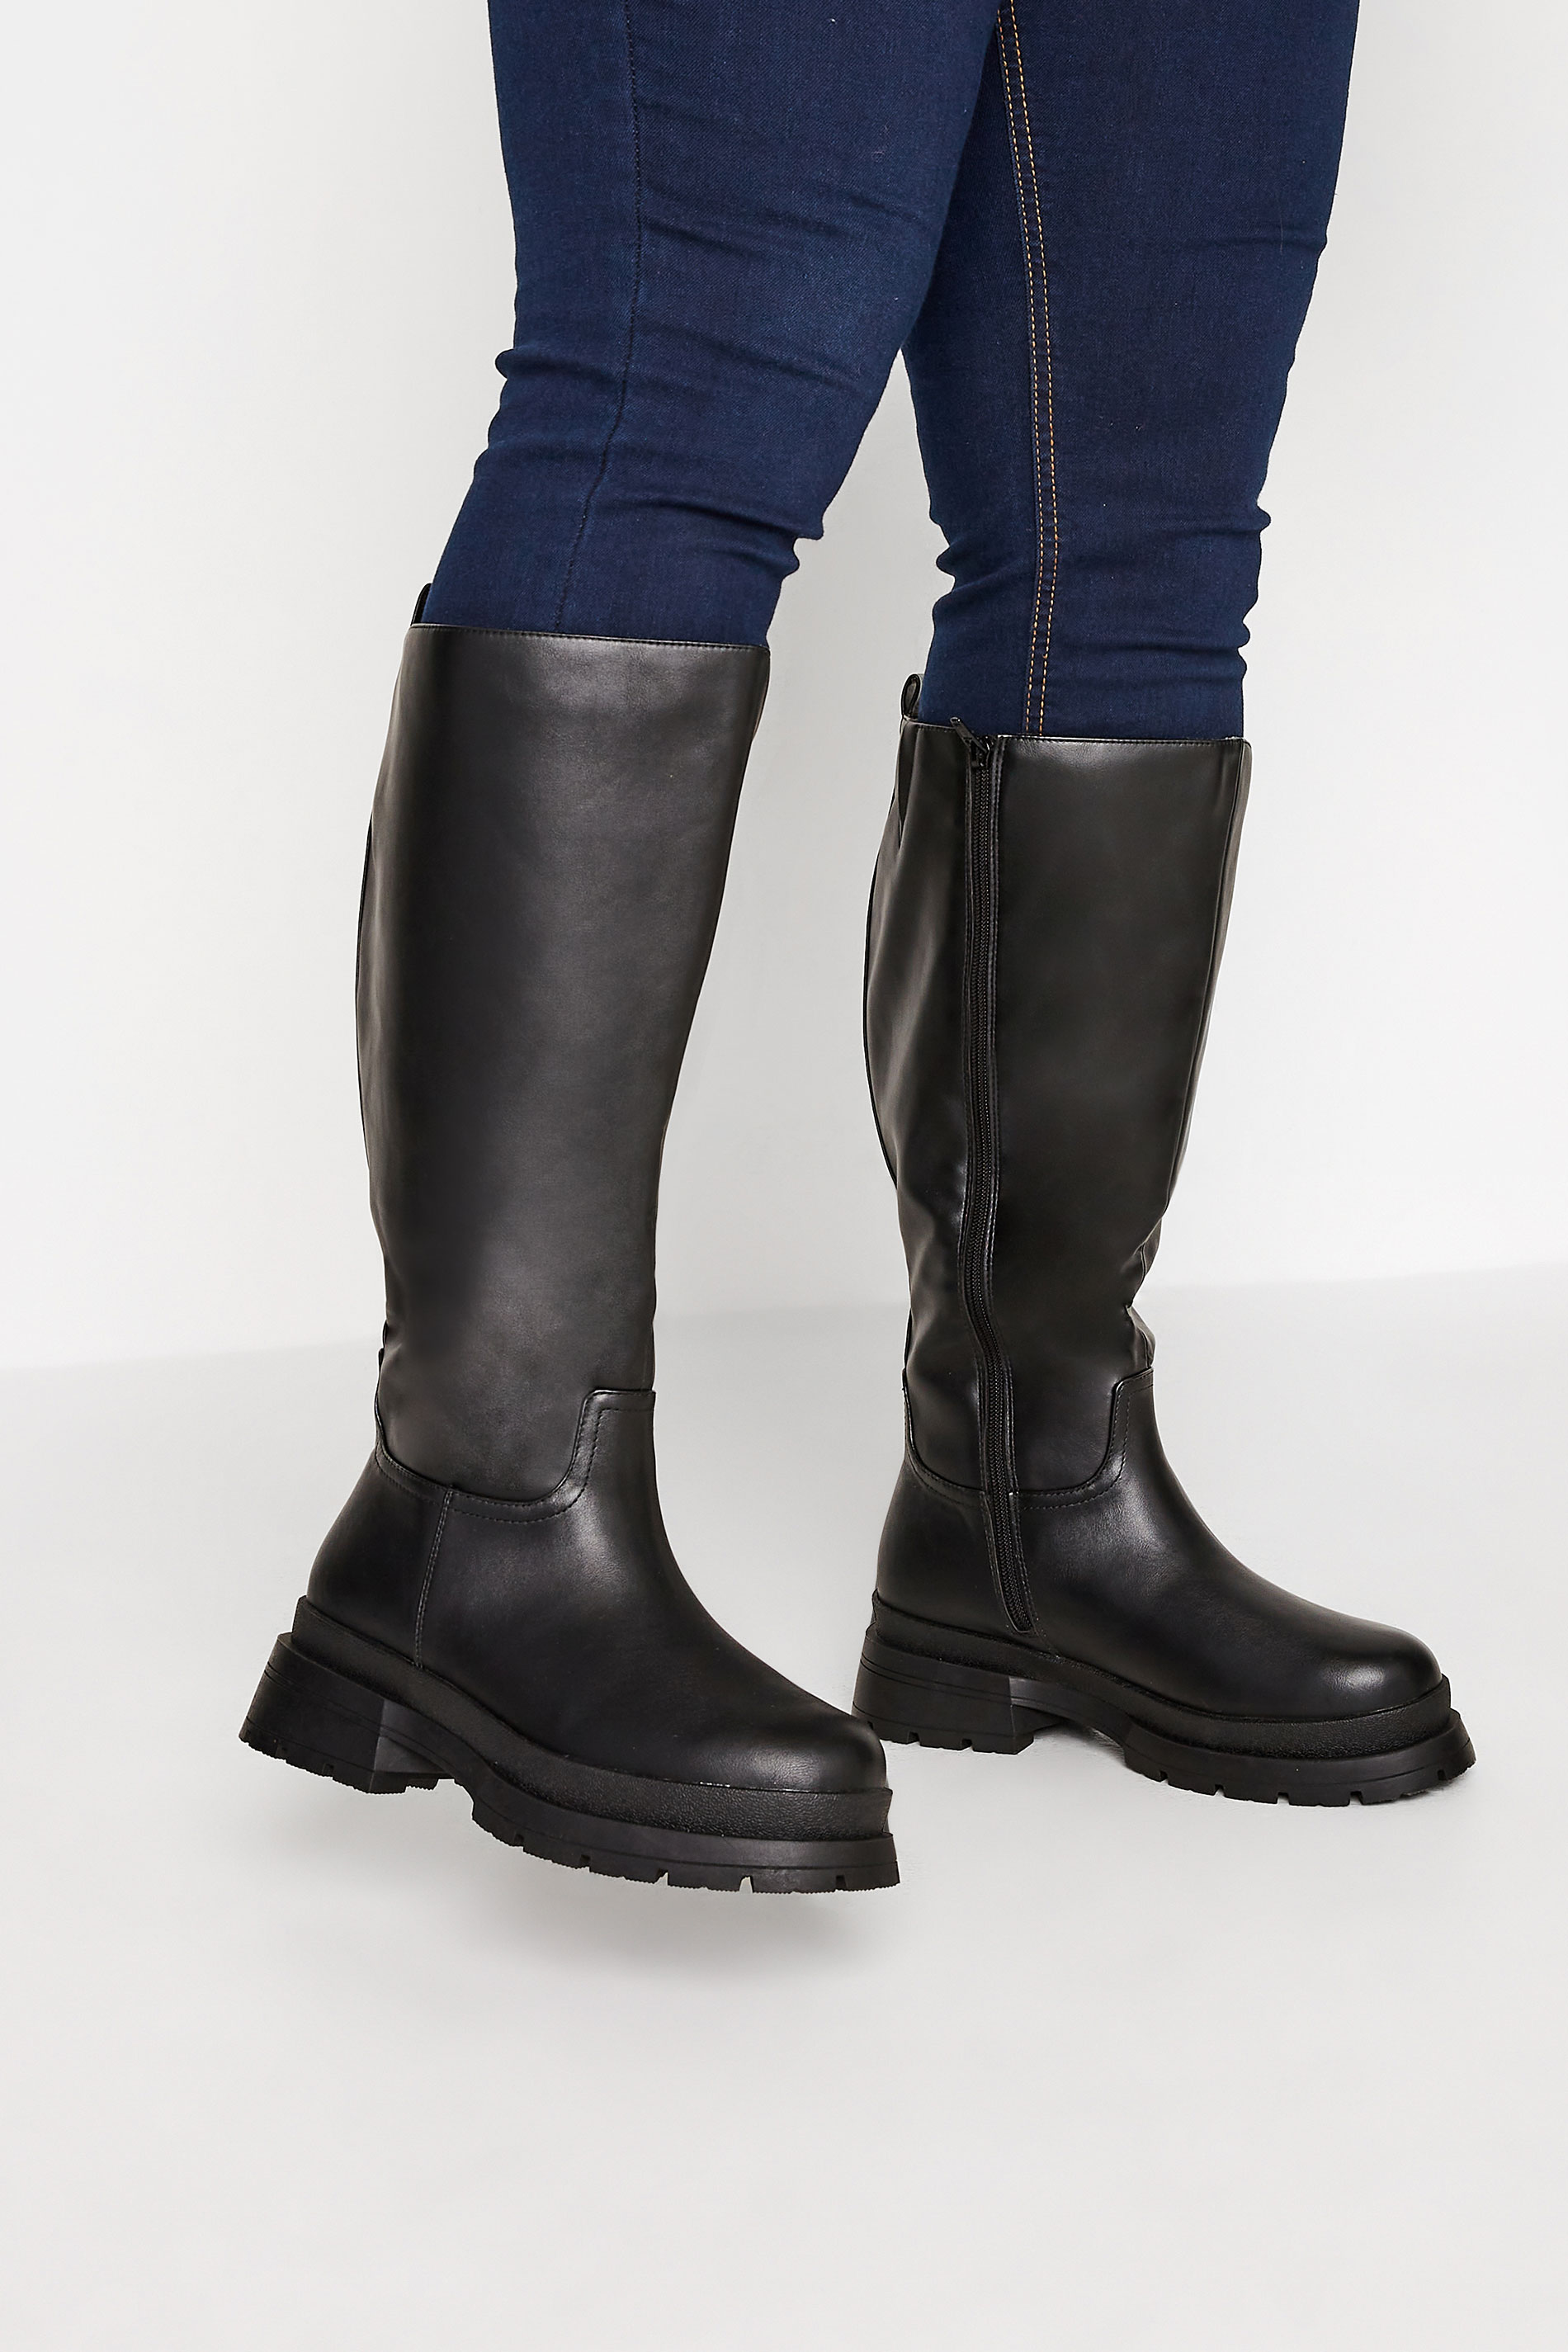 LIMITED COLLECTION Black Faux Leather Pull On Knee High Boots In Extra Wide Fit | Yours Clothing 1